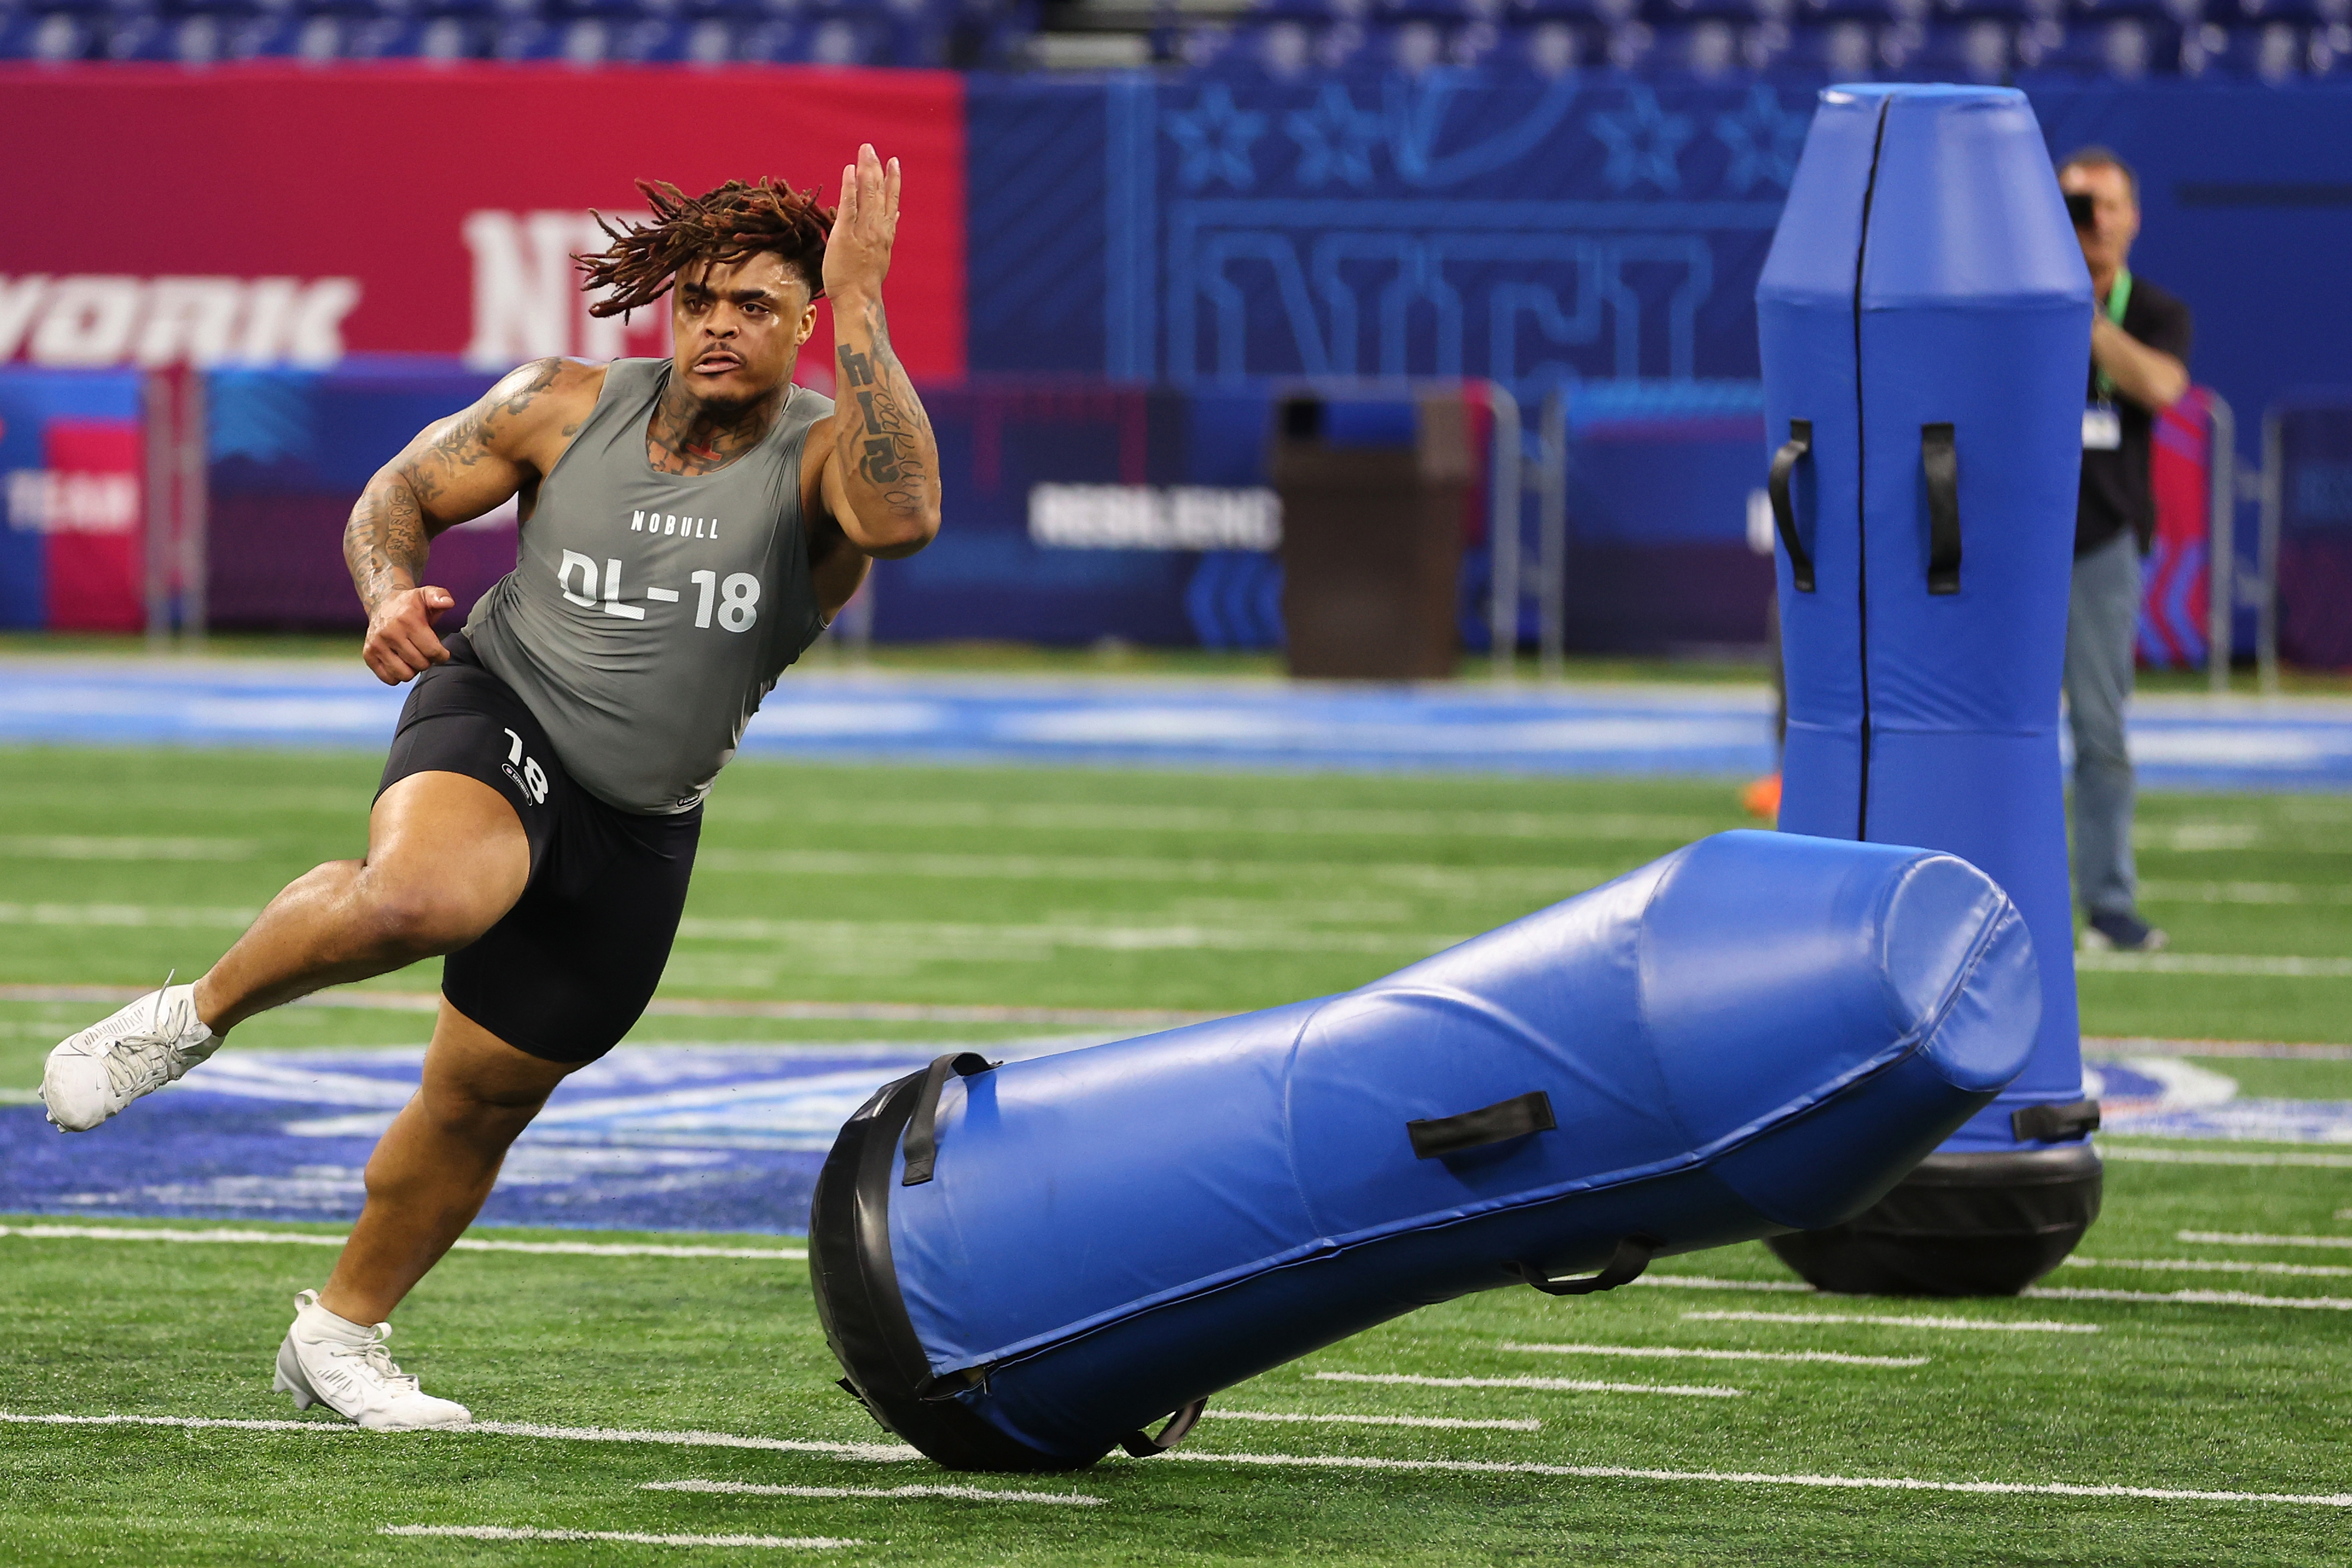 Athlete in action during a football agility drill with equipment on the field